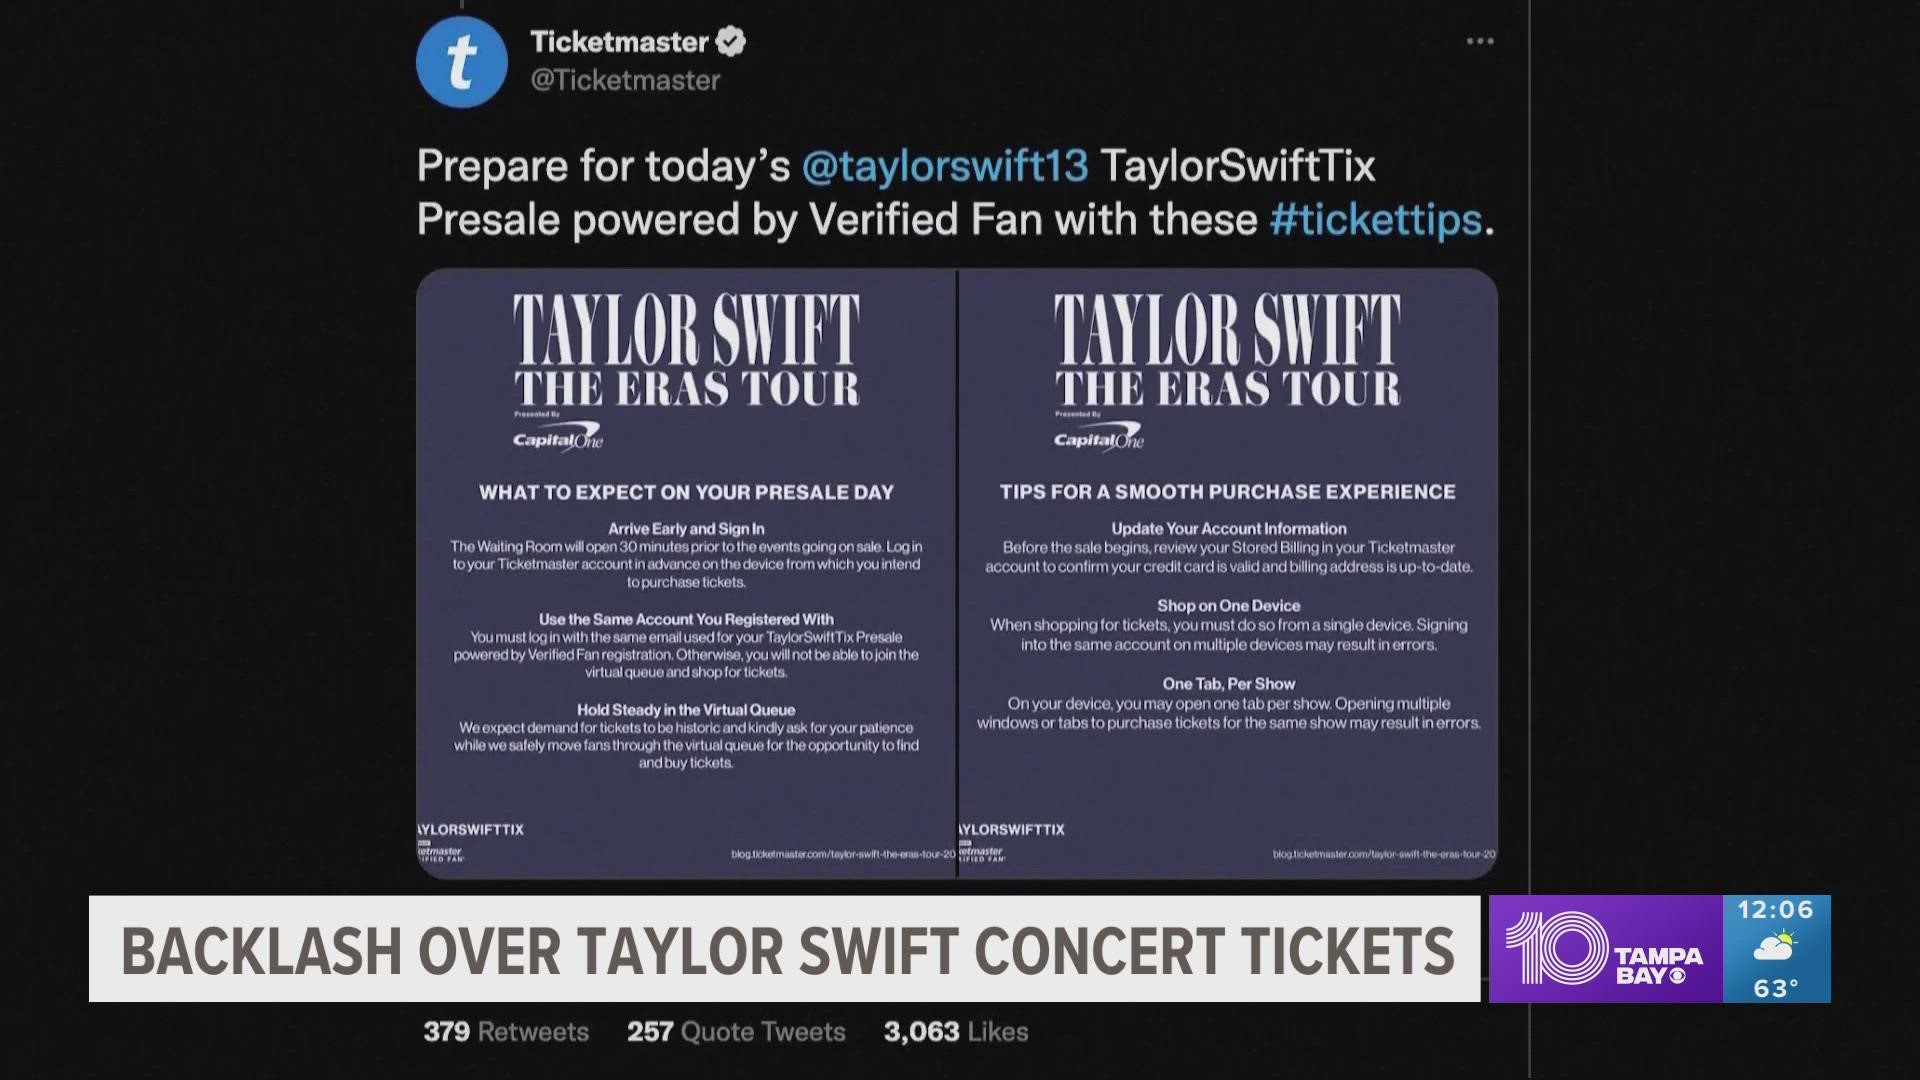 Tennessee's attorney general vowed to investigate consumer complaints after "historically unprecedented demand" crashed Ticketmaster during the Taylor Swift presale.